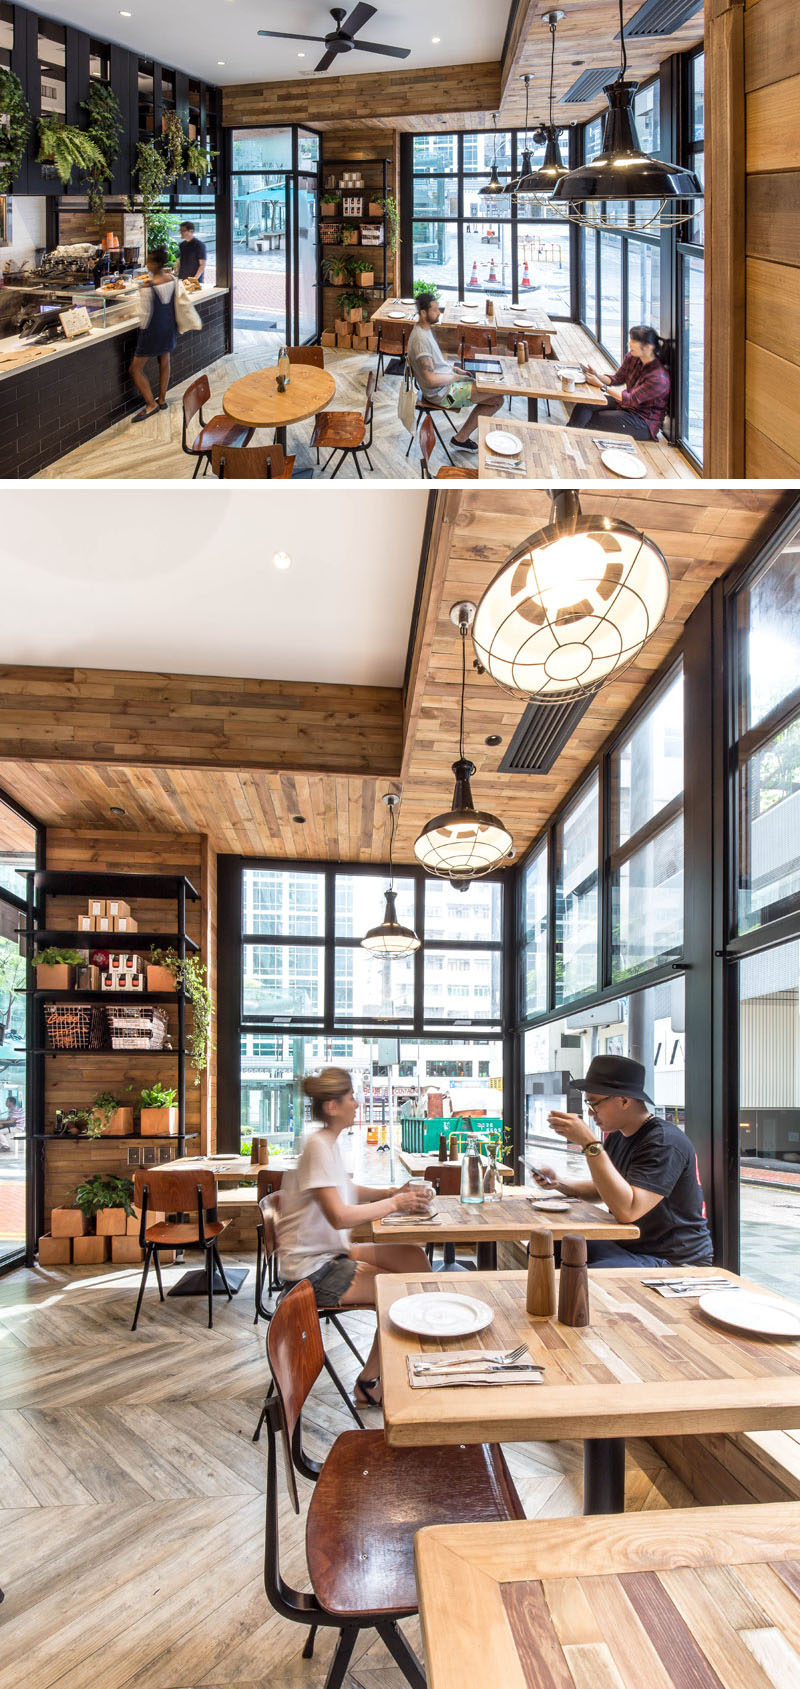 Built-in seating is combined with tables and chairs to maximize the seating options in this cafe.